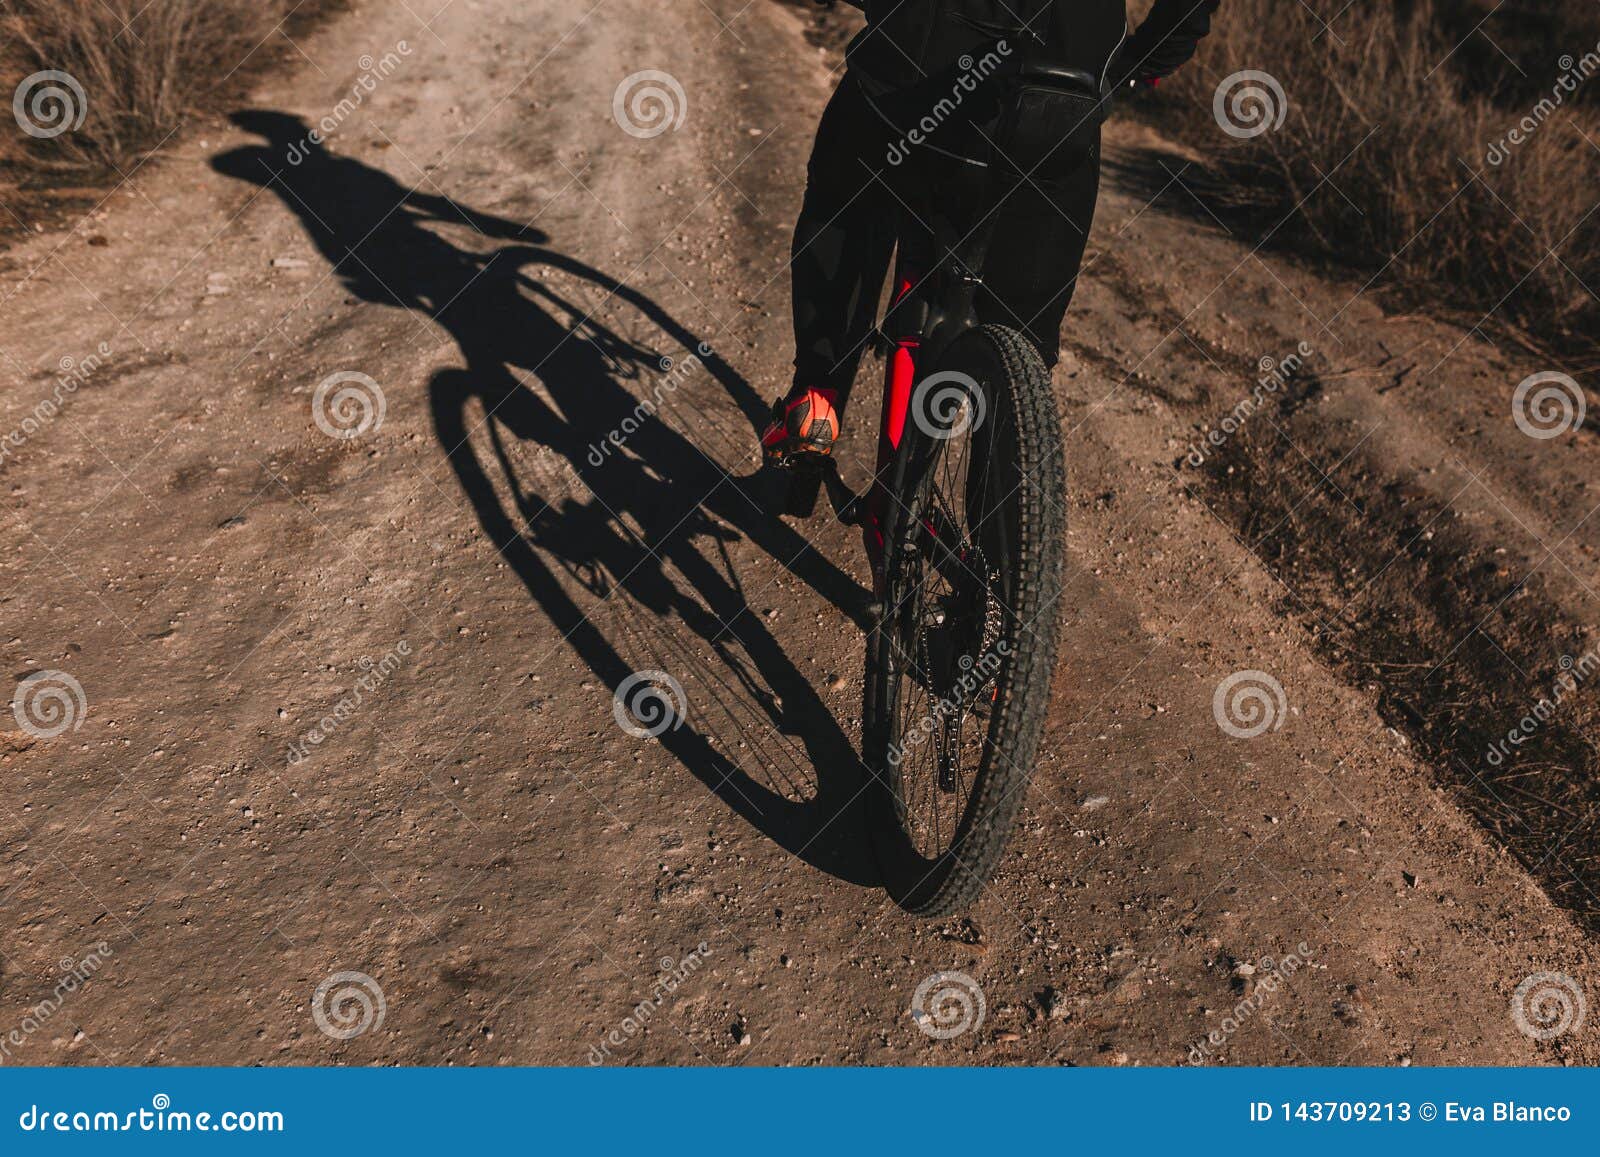 cyclist riding the bike down rocky hill at sunset. extreme sport concept